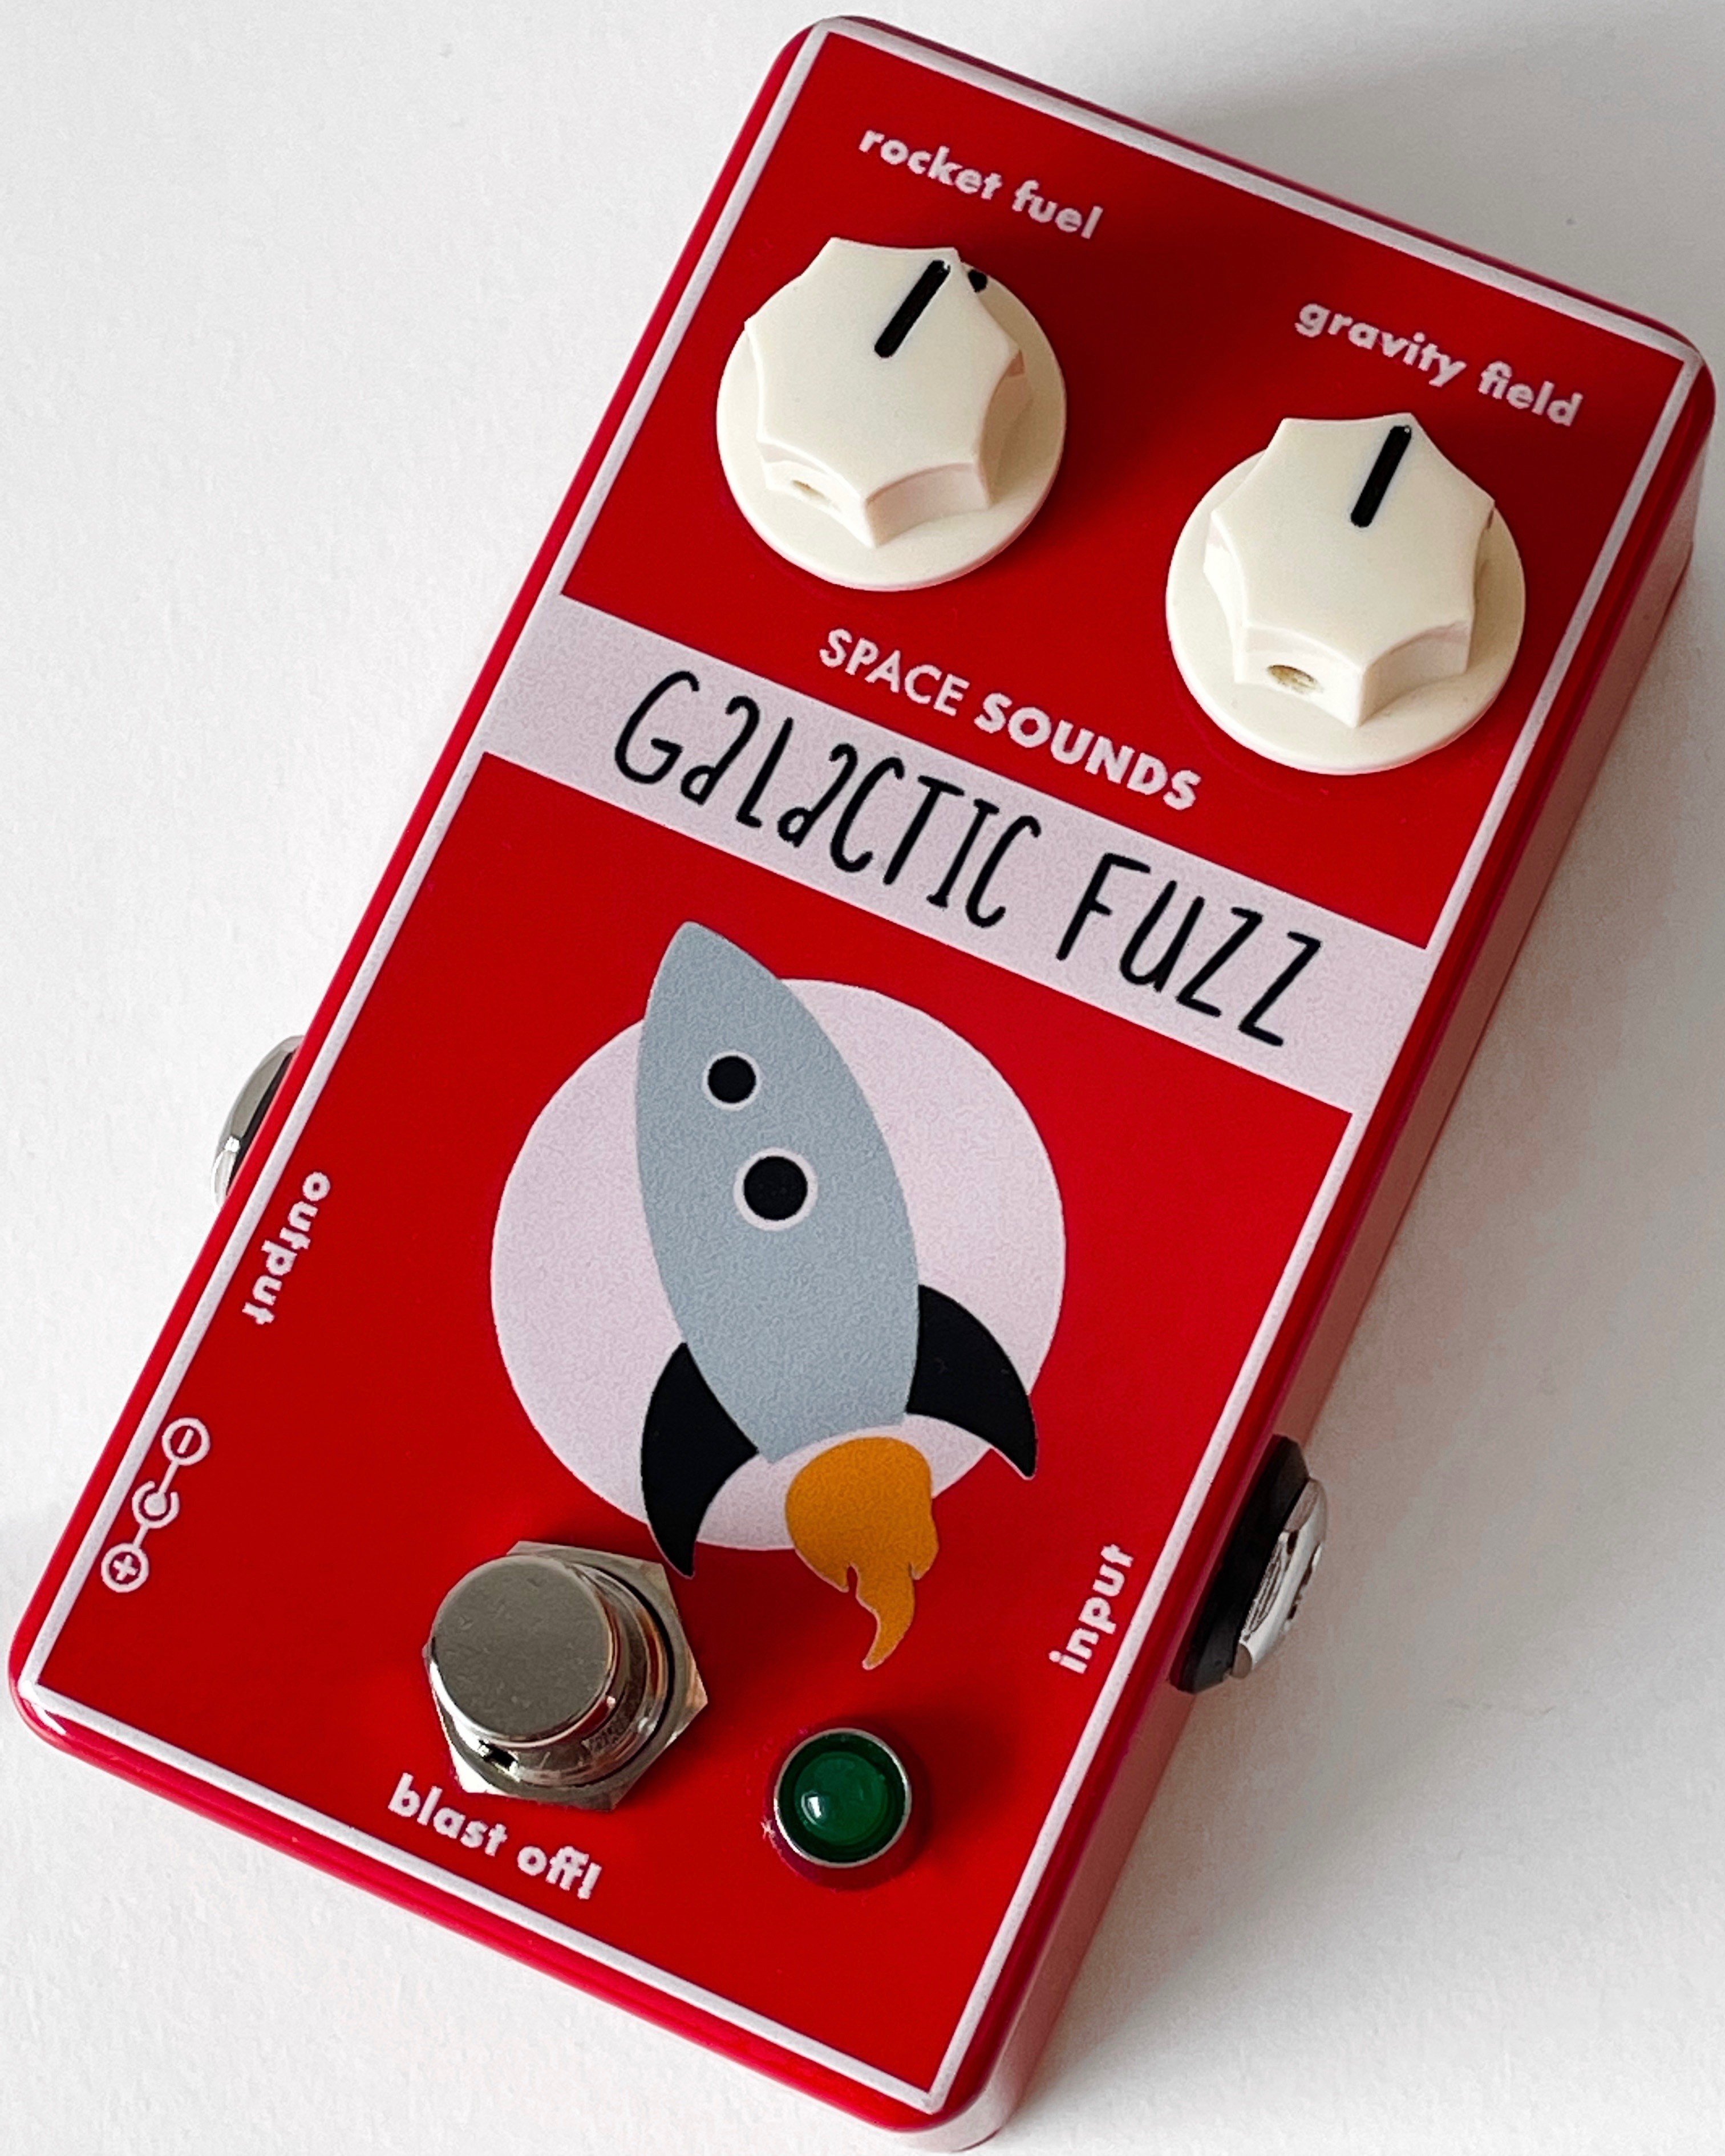 Space Sounds - Galactic Fuzz